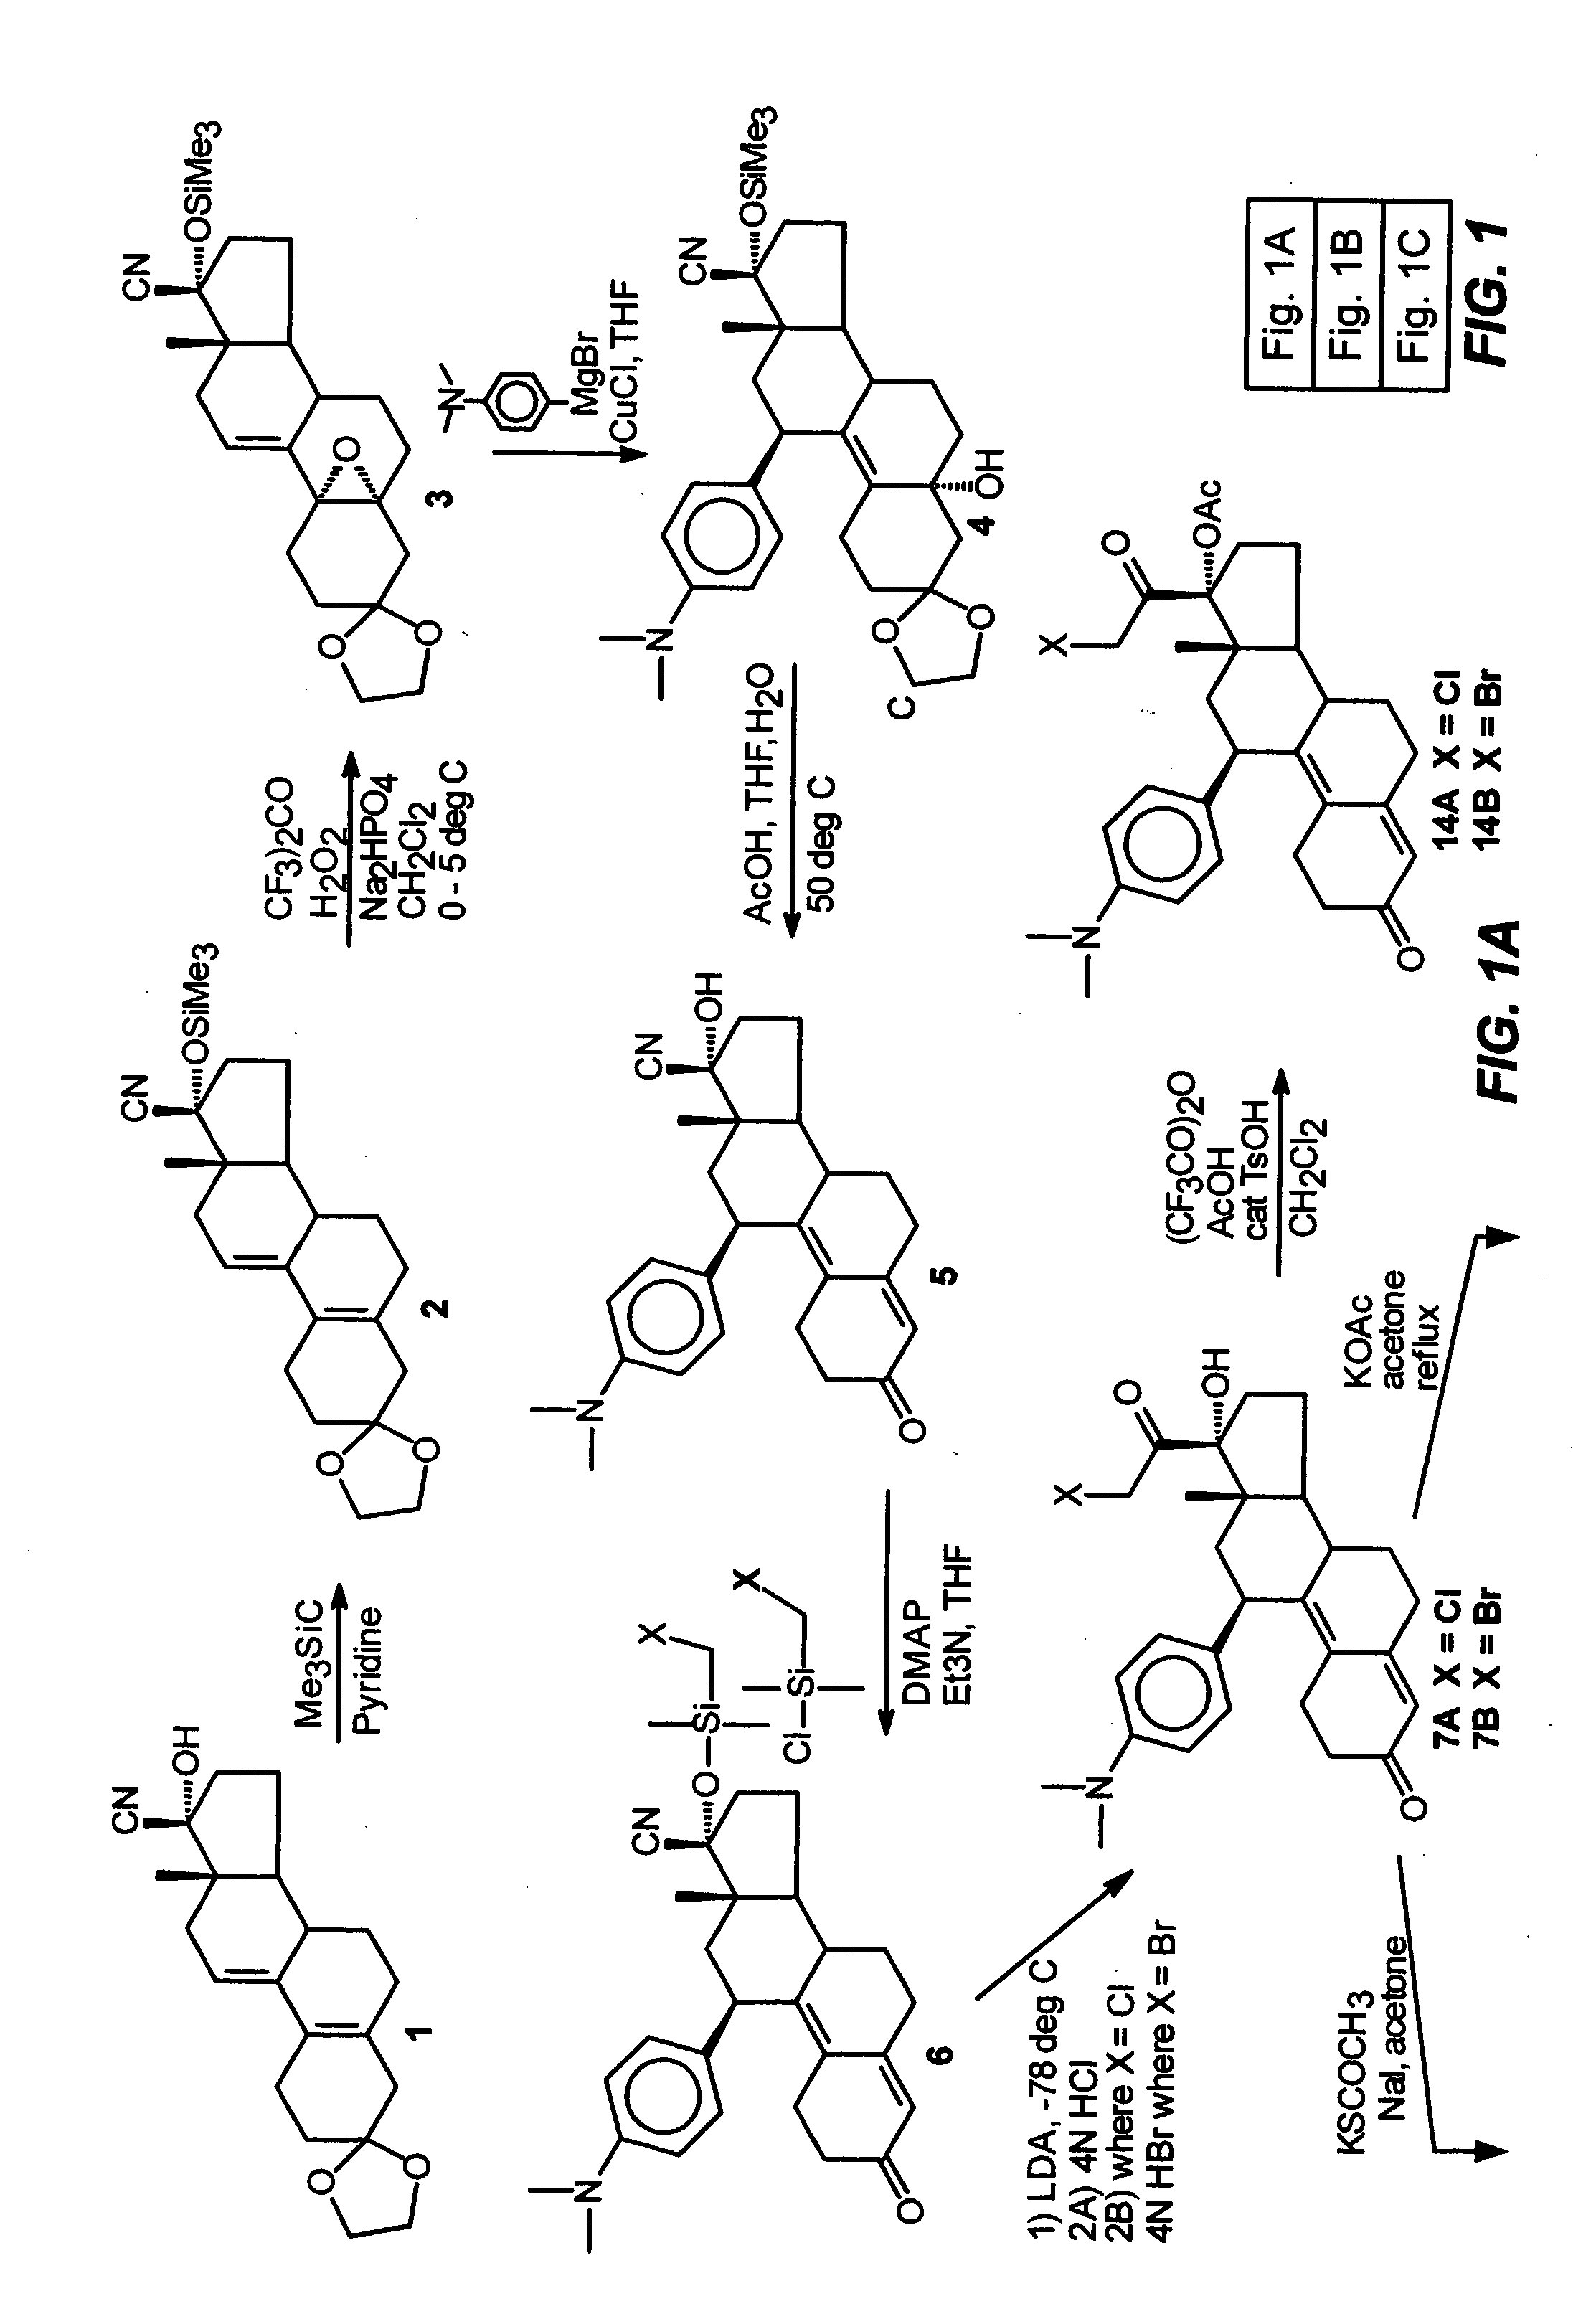 Structural modification of 19-norprogesterone I: 17-alpha-substituted-11-beta-substituted-4-aryl and 21-substituted 19-norpregnadienedione as new antiprogestational agents